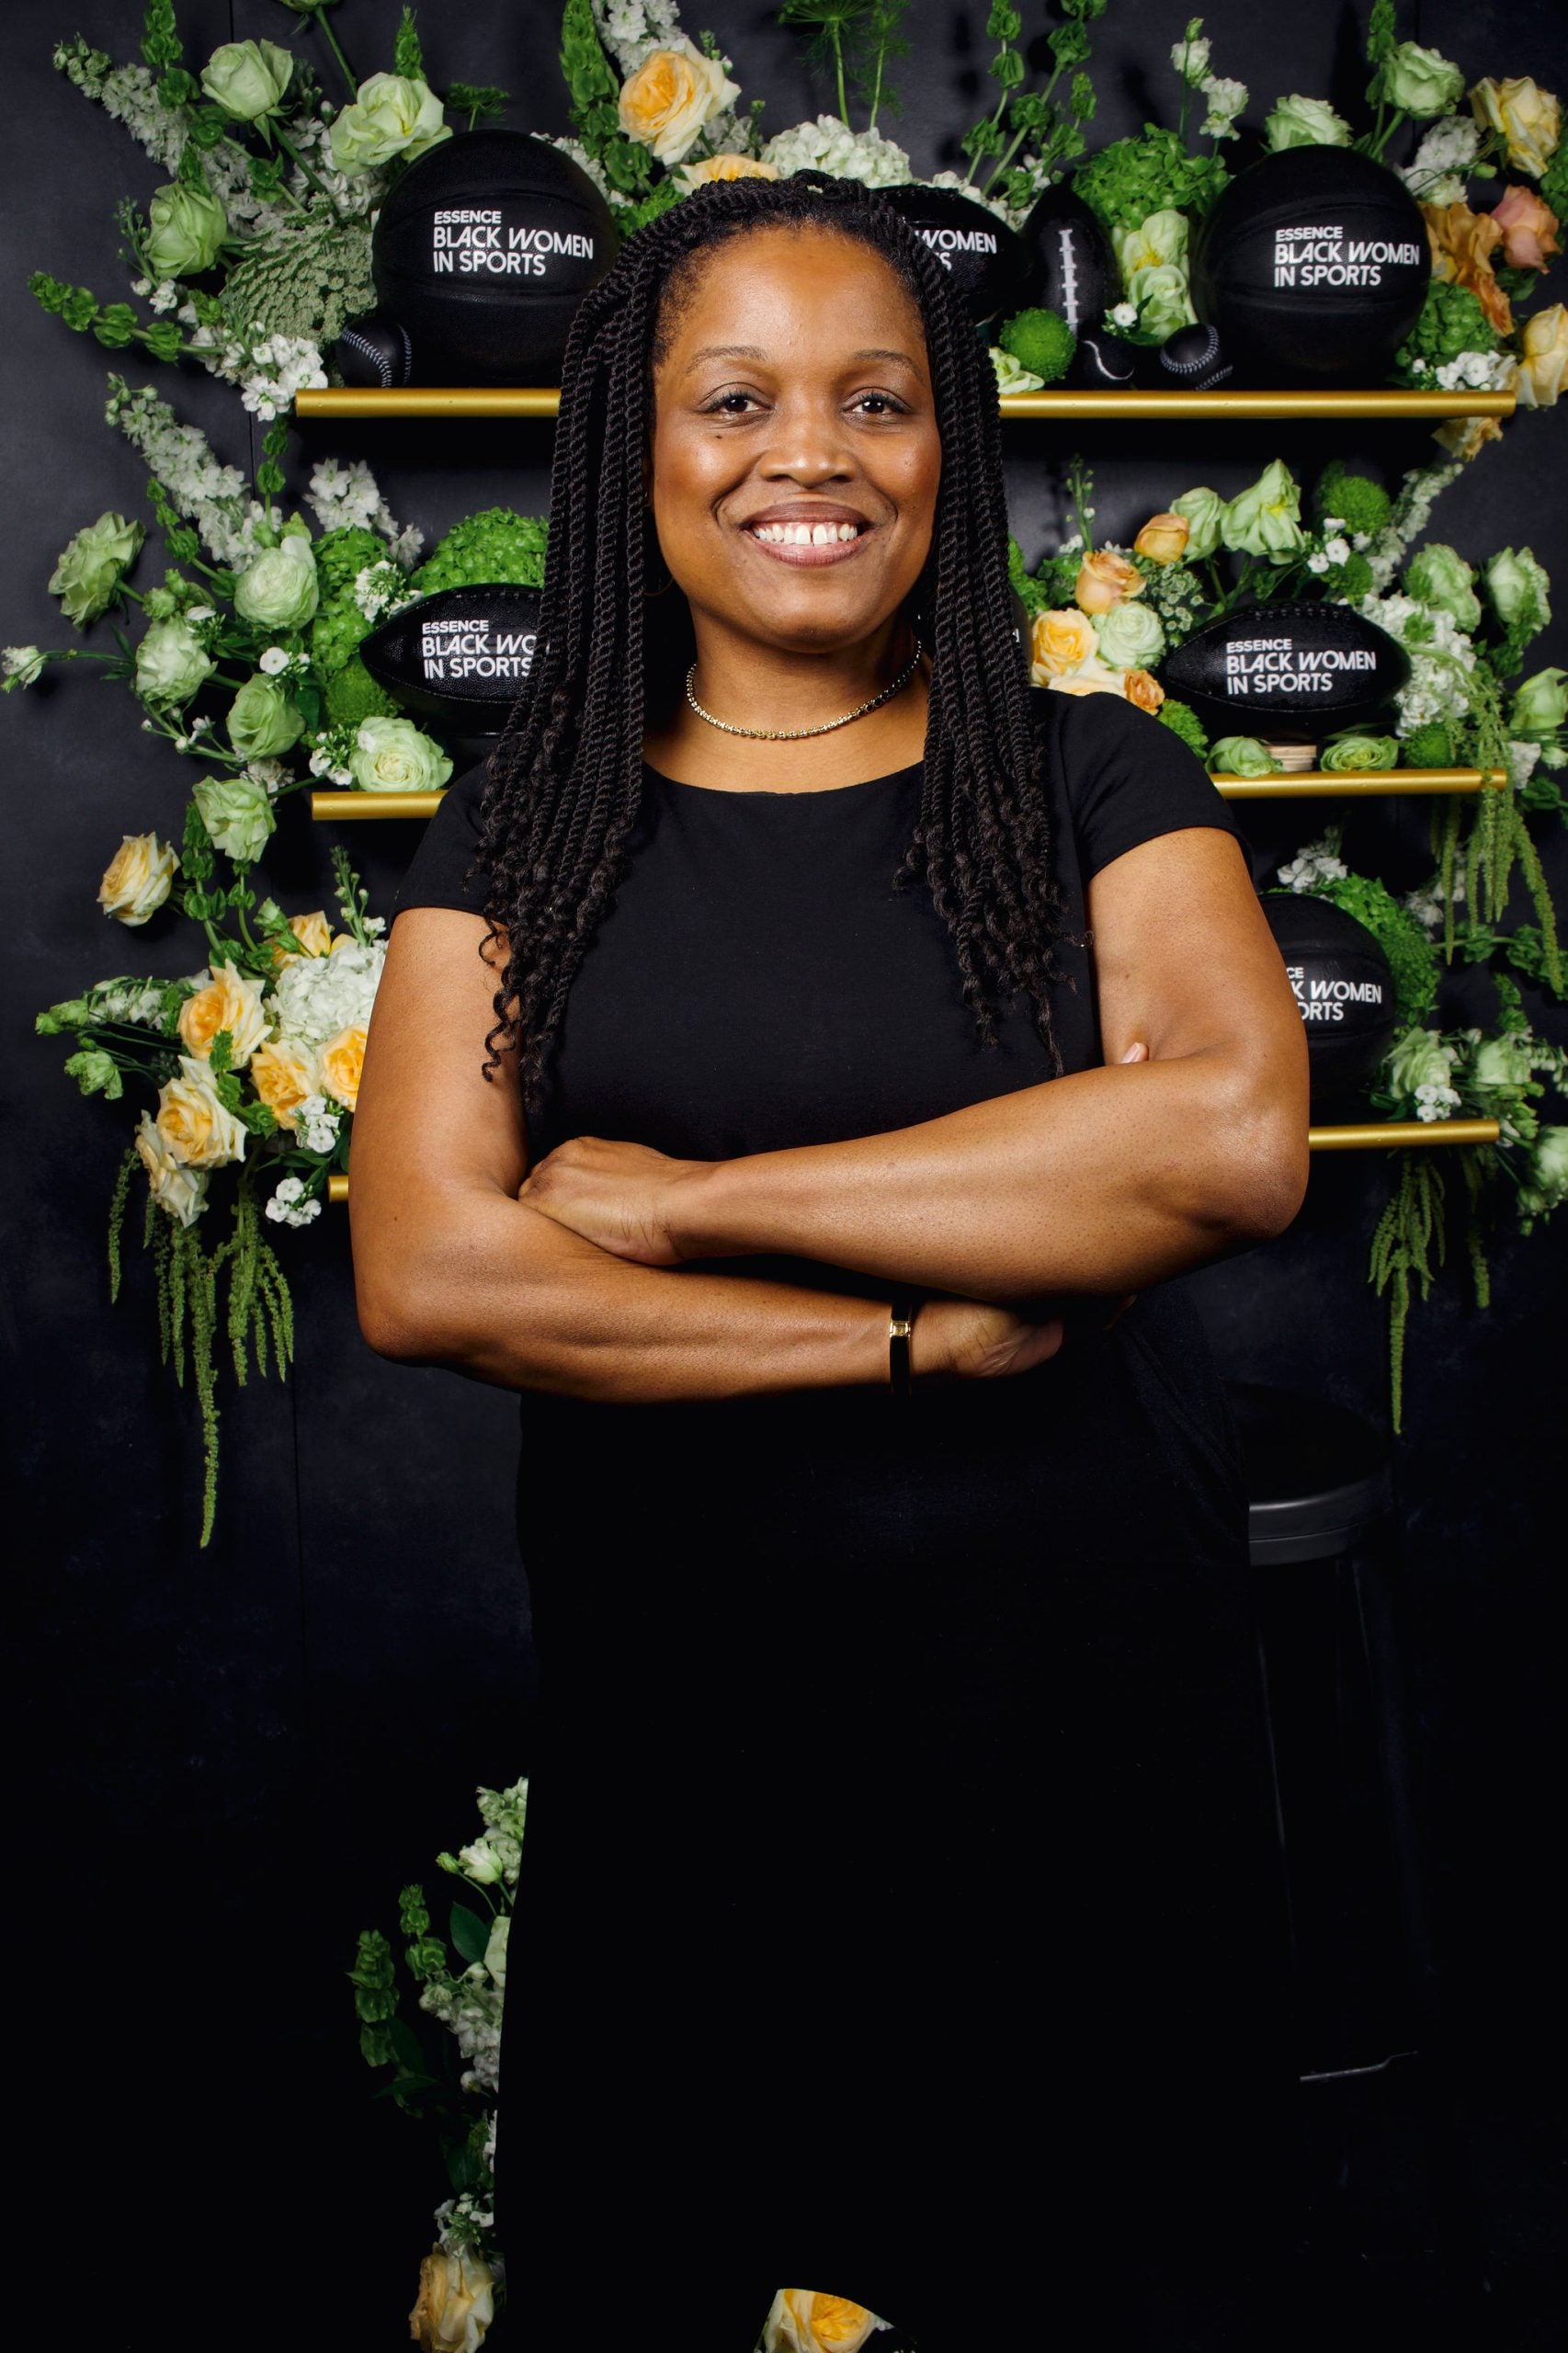 The ESSENCE Black Women In Sports Studio Was A Victory For Black Women In Athletics